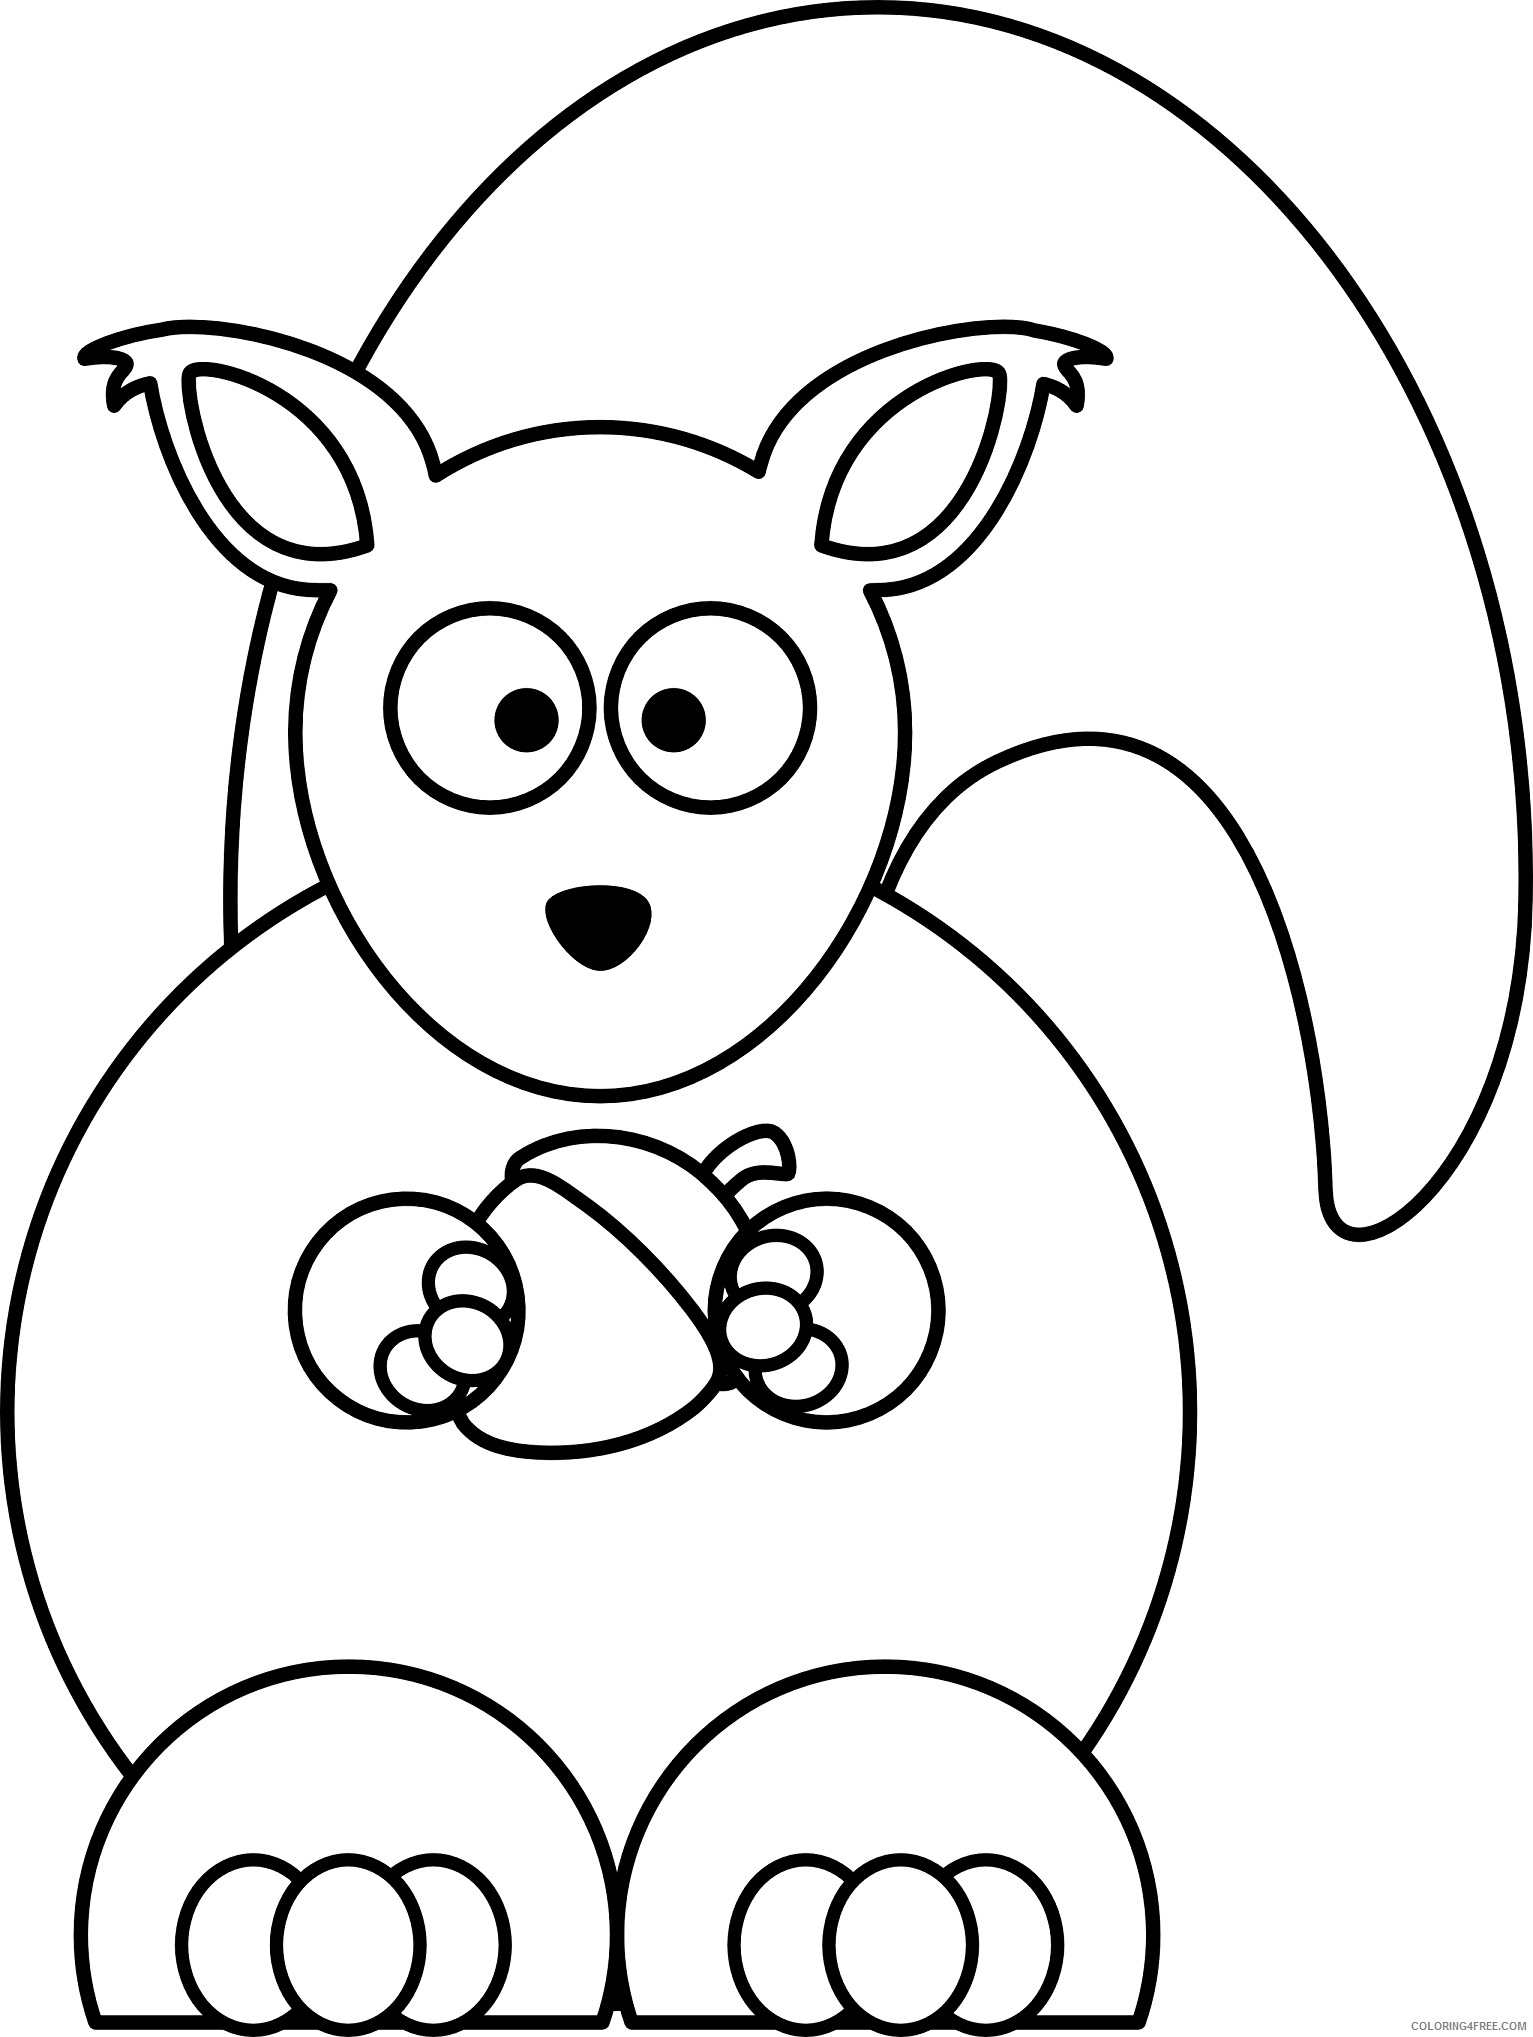 Squirrel Outline Coloring Pages squirrel 97 png Printable Coloring4free